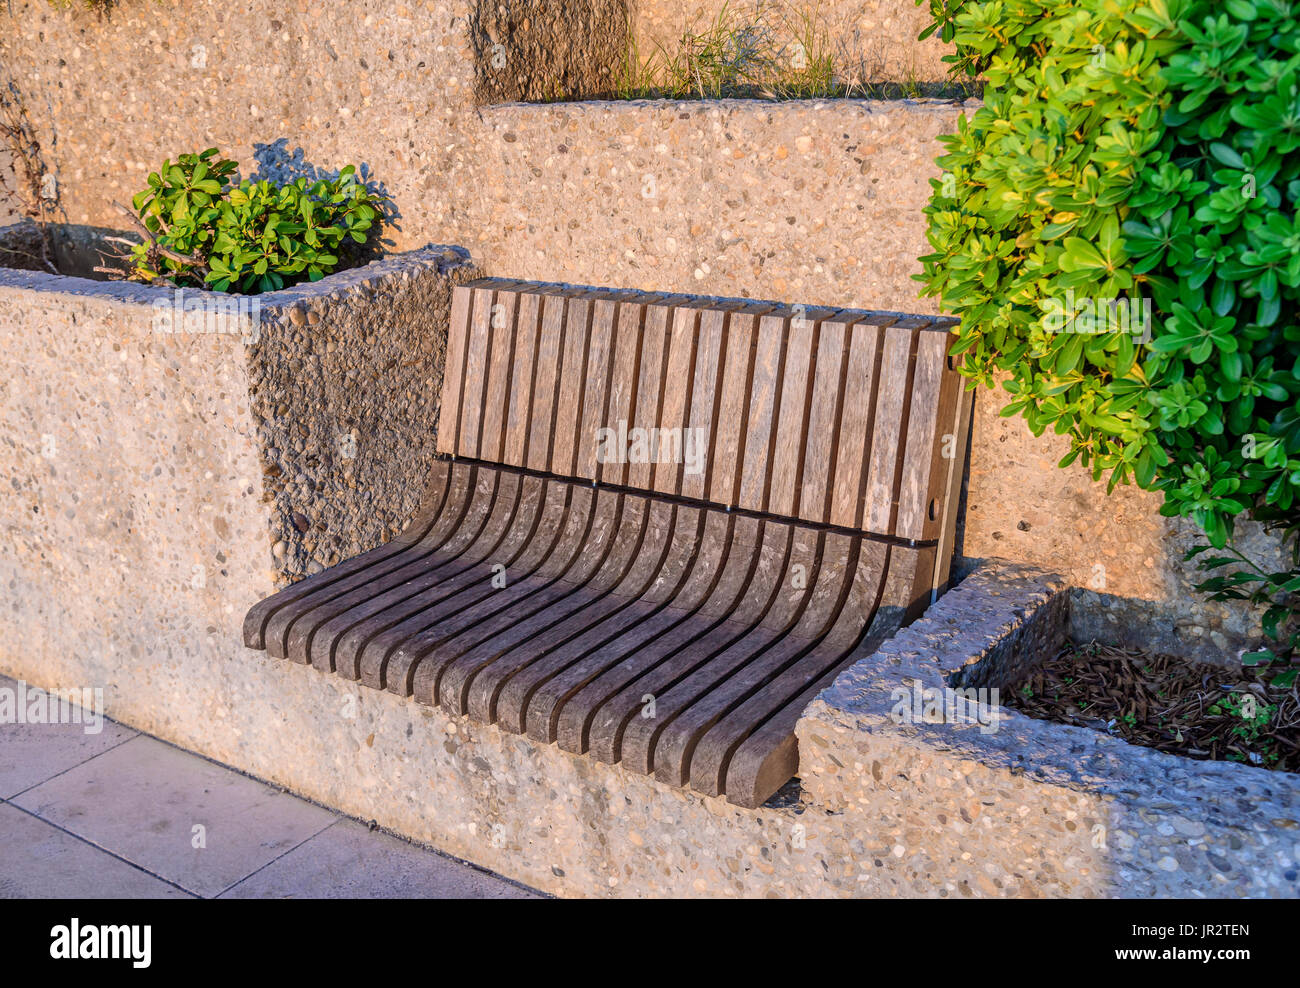 Wooden bench in a stone architectural structure. Stock Photo